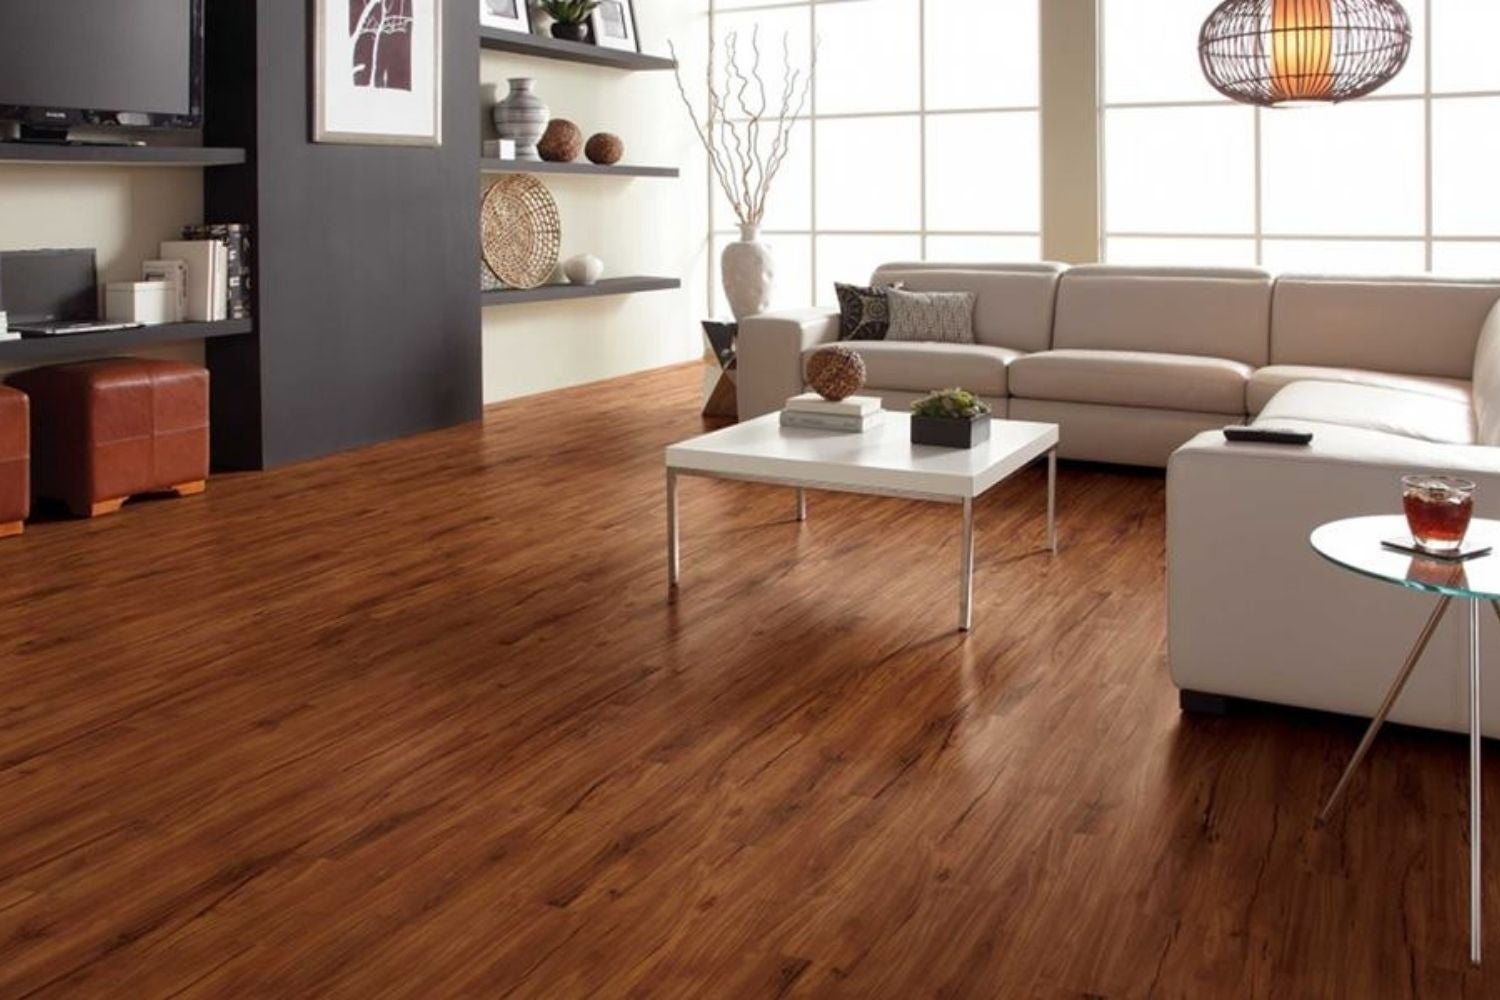 Style Meets Practicality With Luxury Vinyl Flooring Tile post thumbnail image